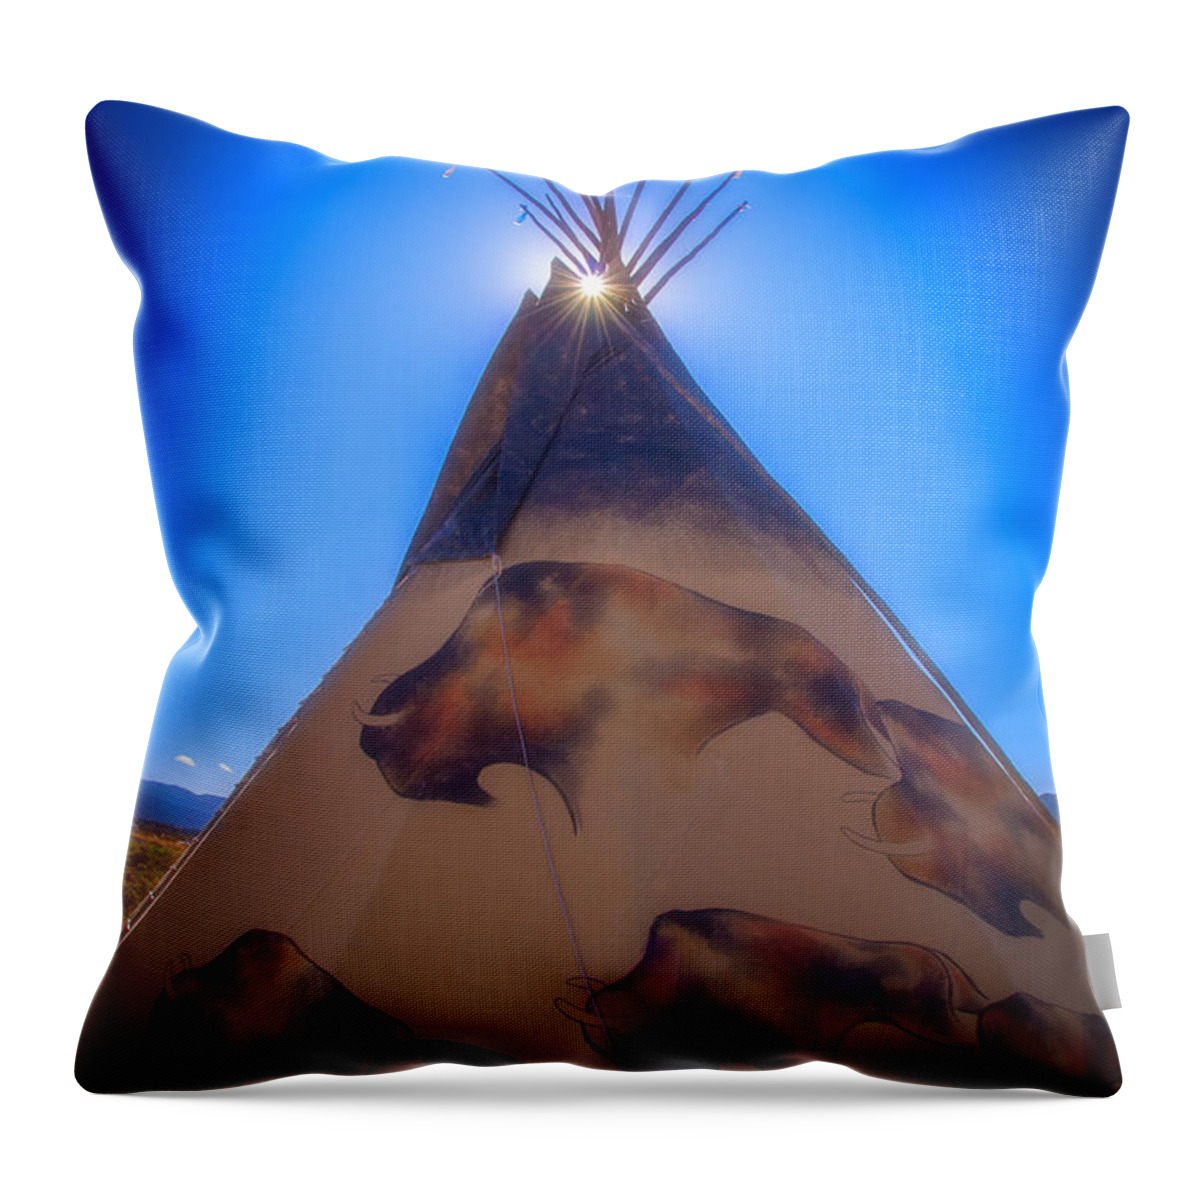 New Mexico Throw Pillow featuring the photograph Teepee by Joye Ardyn Durham